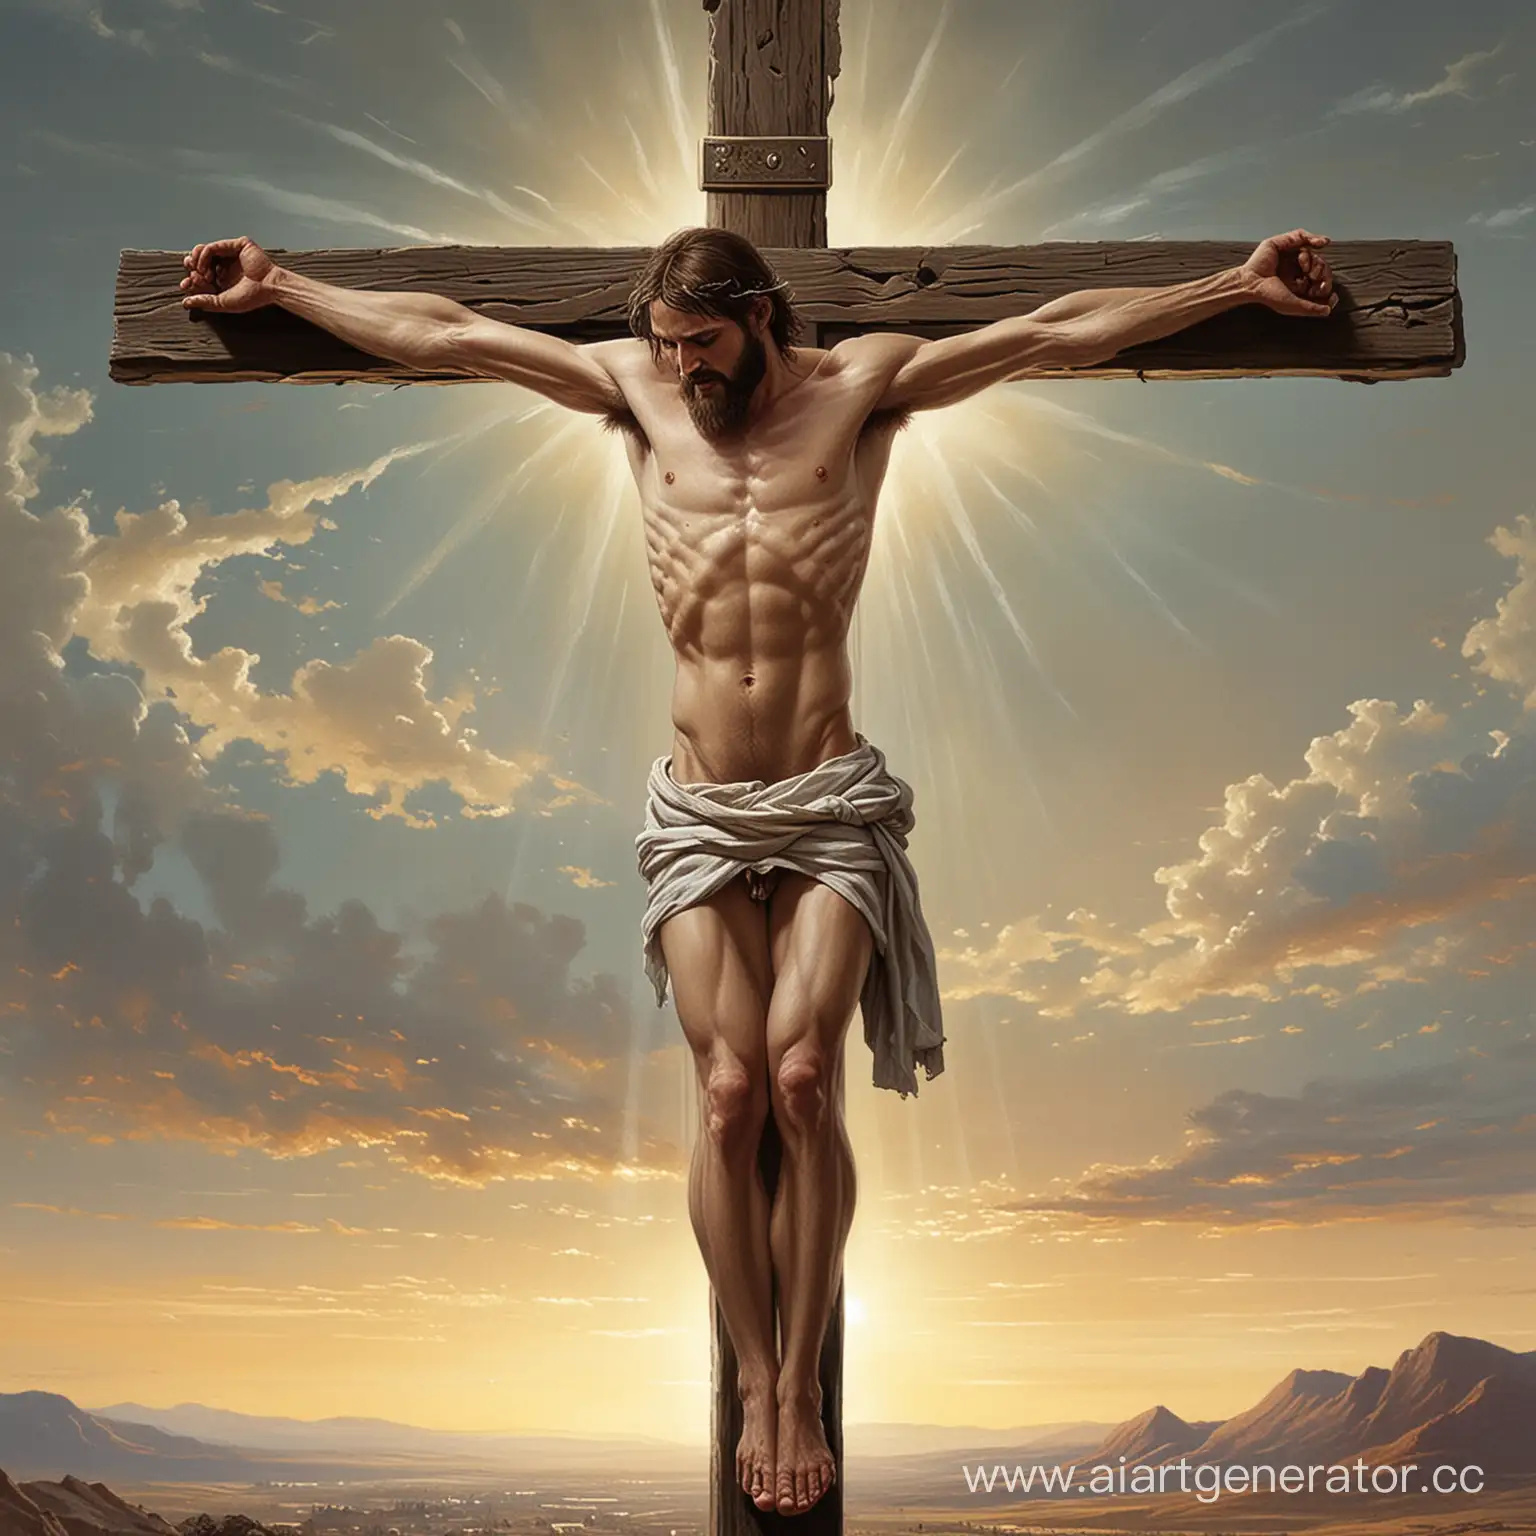 Symbolic-Crucifixion-Depiction-Surreal-Representation-of-Sacrifice-and-Redemption